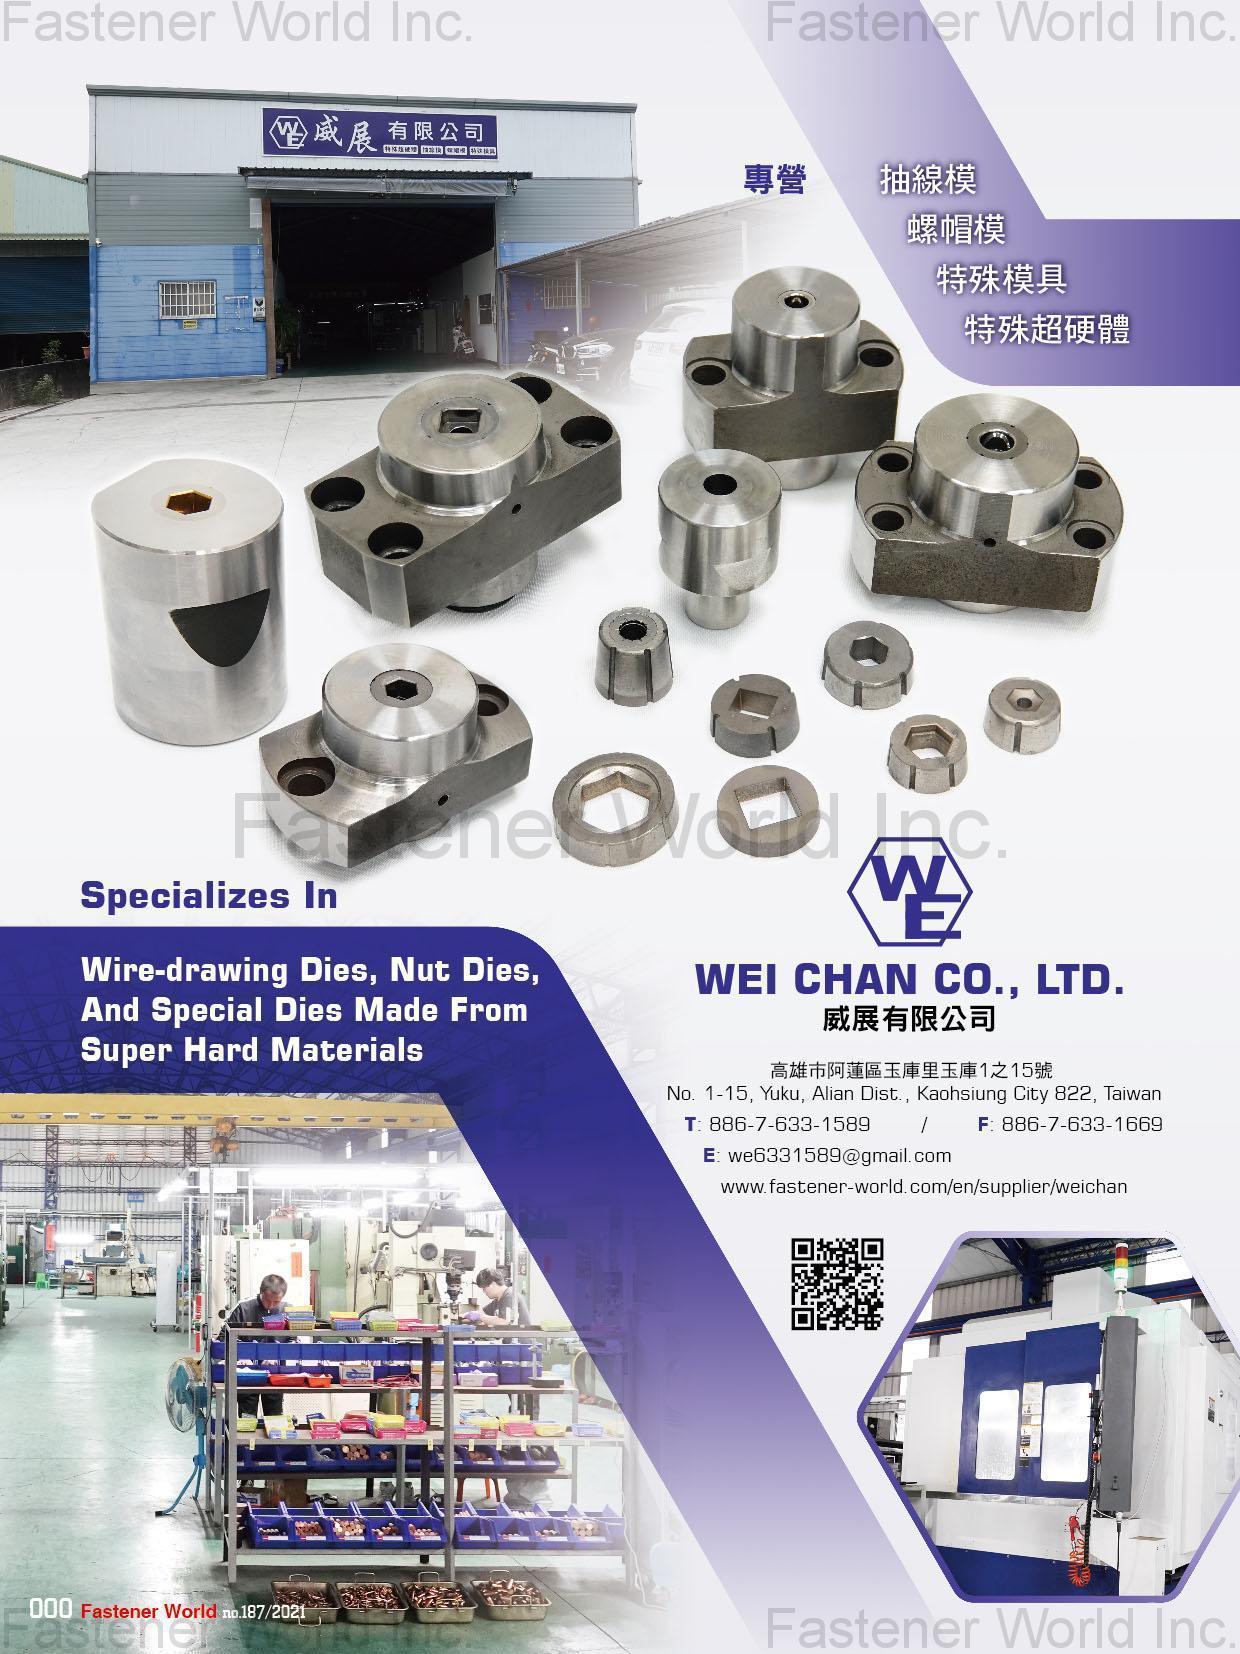 WEI CHAN CO., LTD. , Wire-drawing Dies, Nut Dies, and Special Dies made from Super Materials